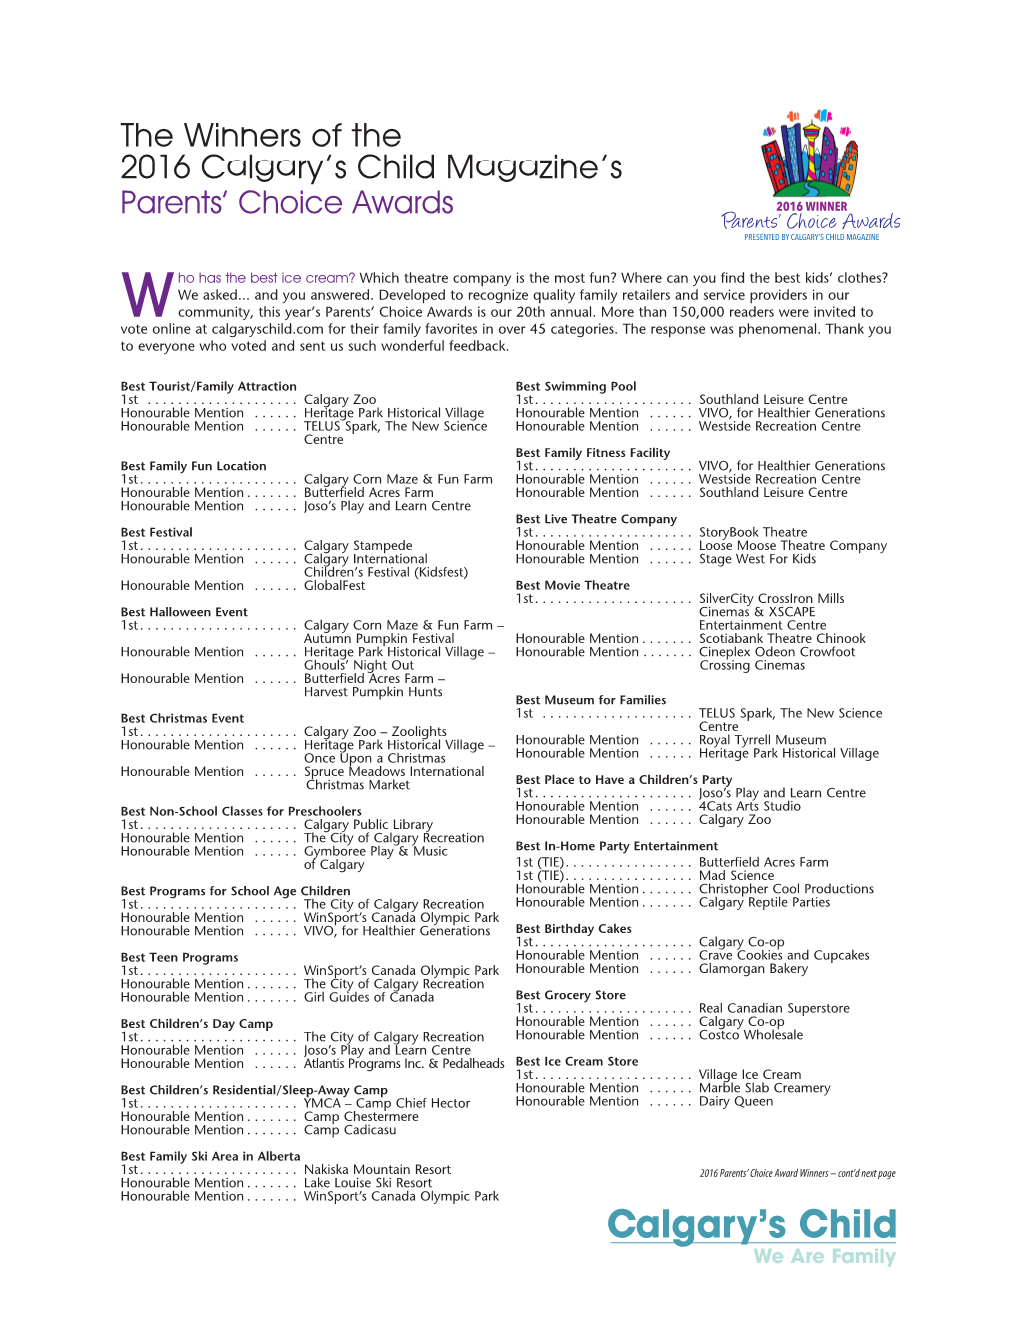 The Winners of the 2016 Calgary's Child Magazine's Parents' Choice